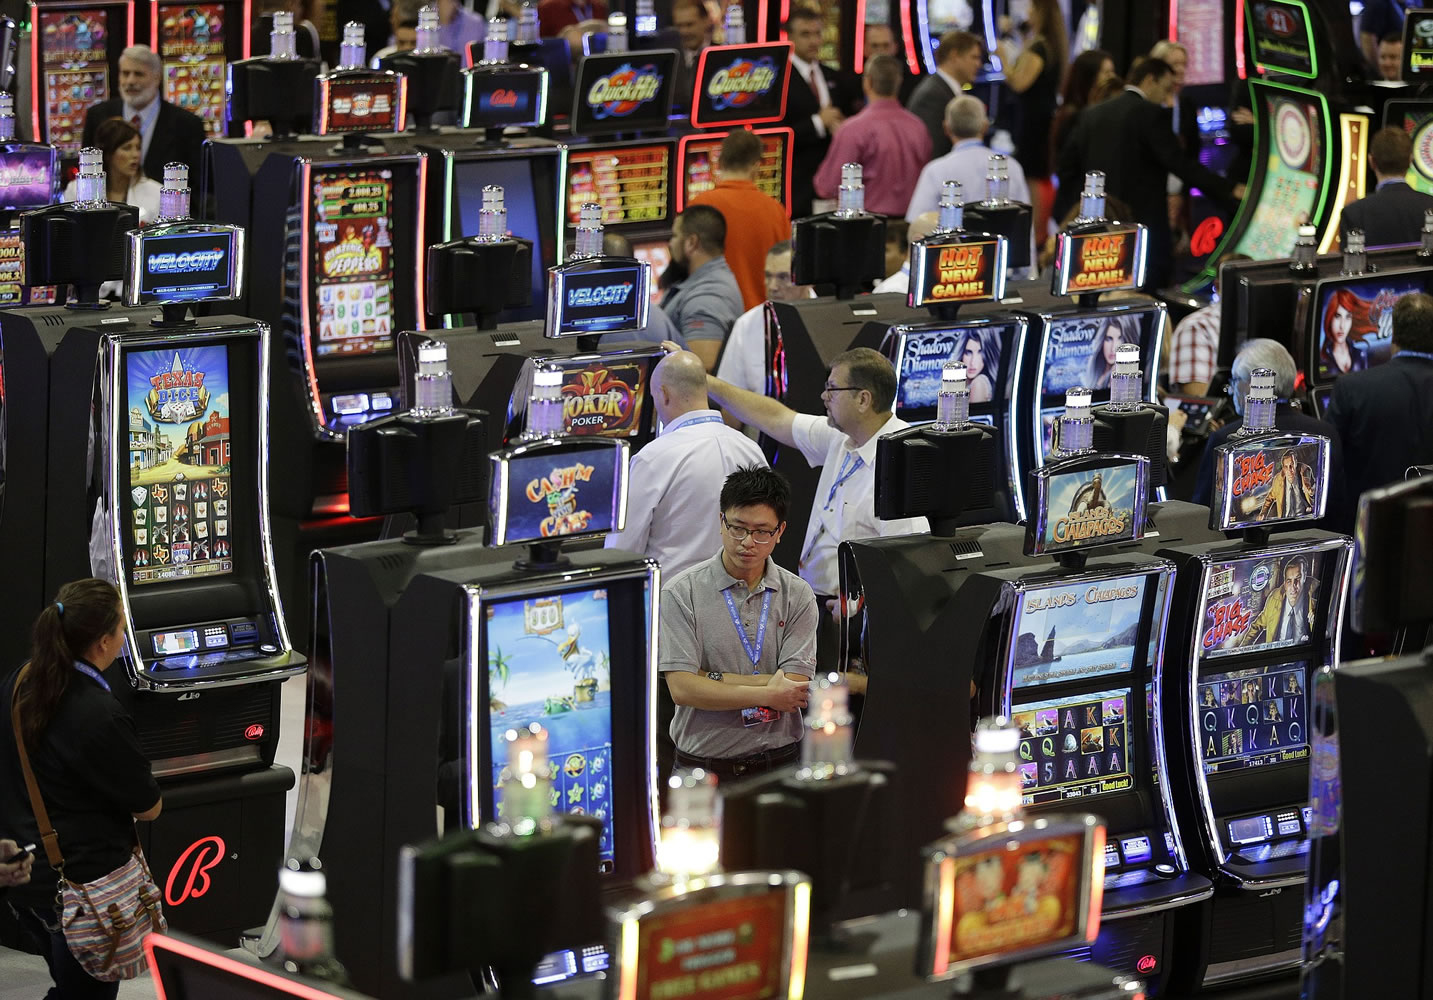 People look at slot machines at the Ballys Technology booth during the Global Gaming Expo Tuesday, Sept. 30, 2014, in Las Vegas. U.S. casinos and the makers of the games found inside had a $240 billion economic impact and employed 1.7 million people in 2013, a study shows. The American Gaming Association was expected to announce the results of the study Tuesday, Sept. 30, 2014.